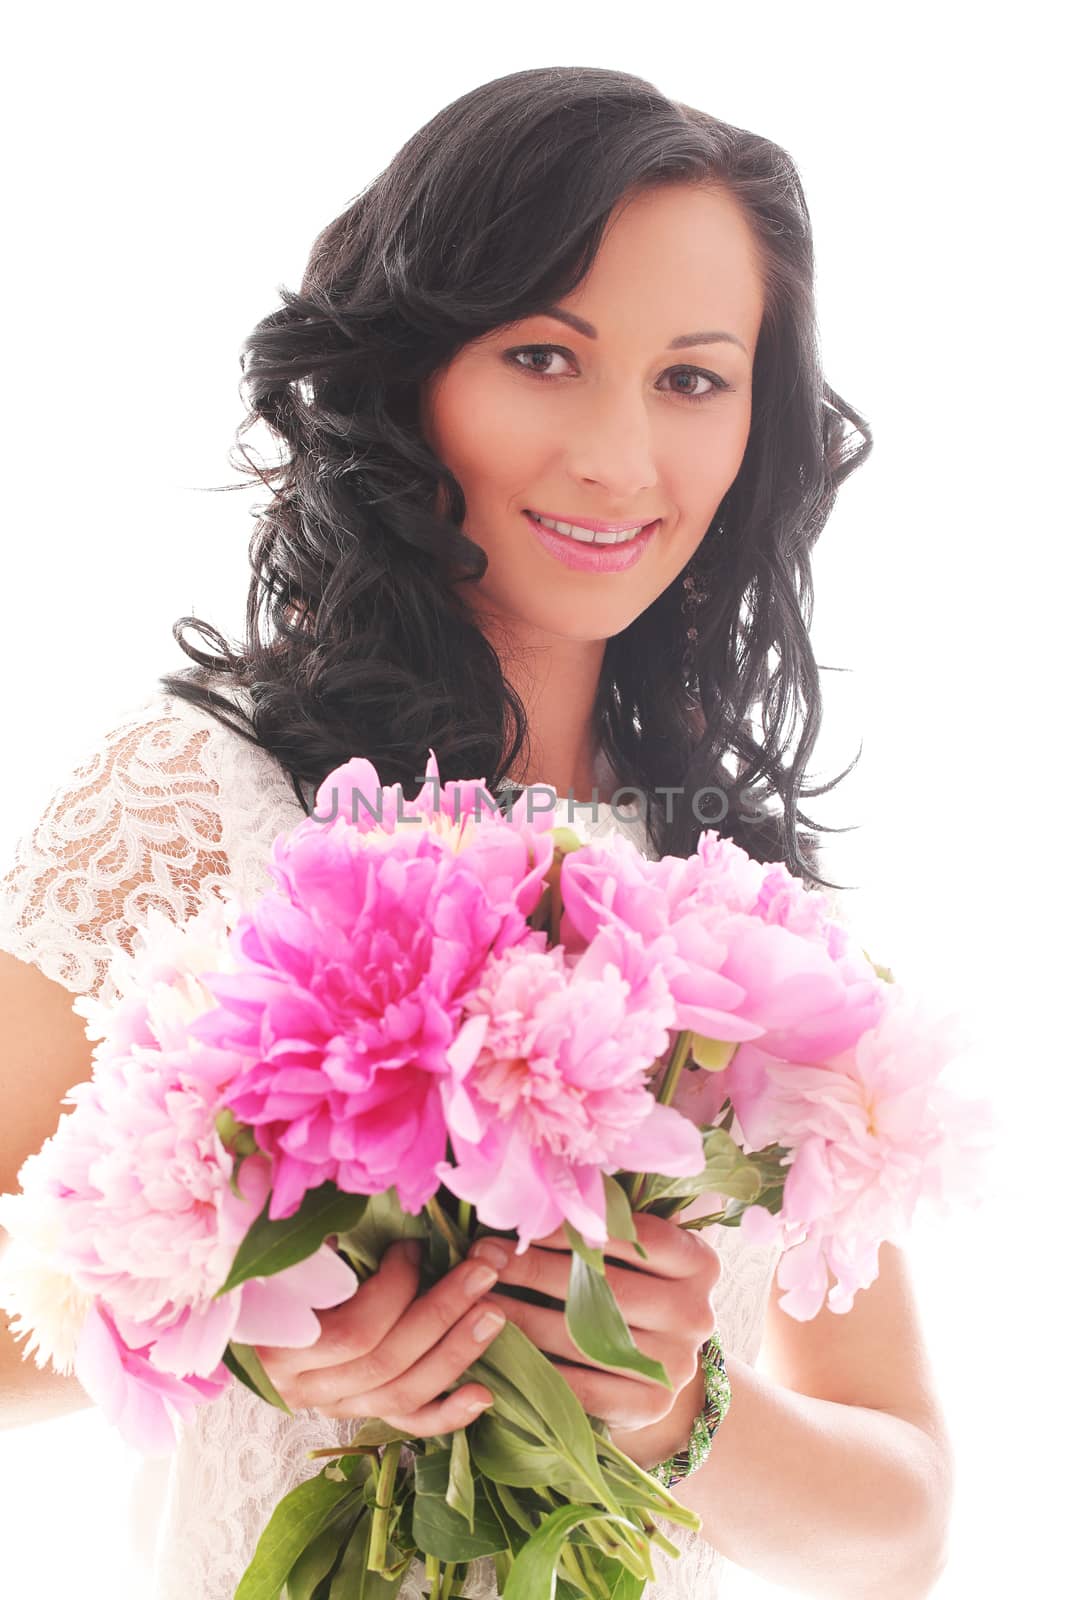 Portrait of beautiful young woman with peonies bouquet on a white background